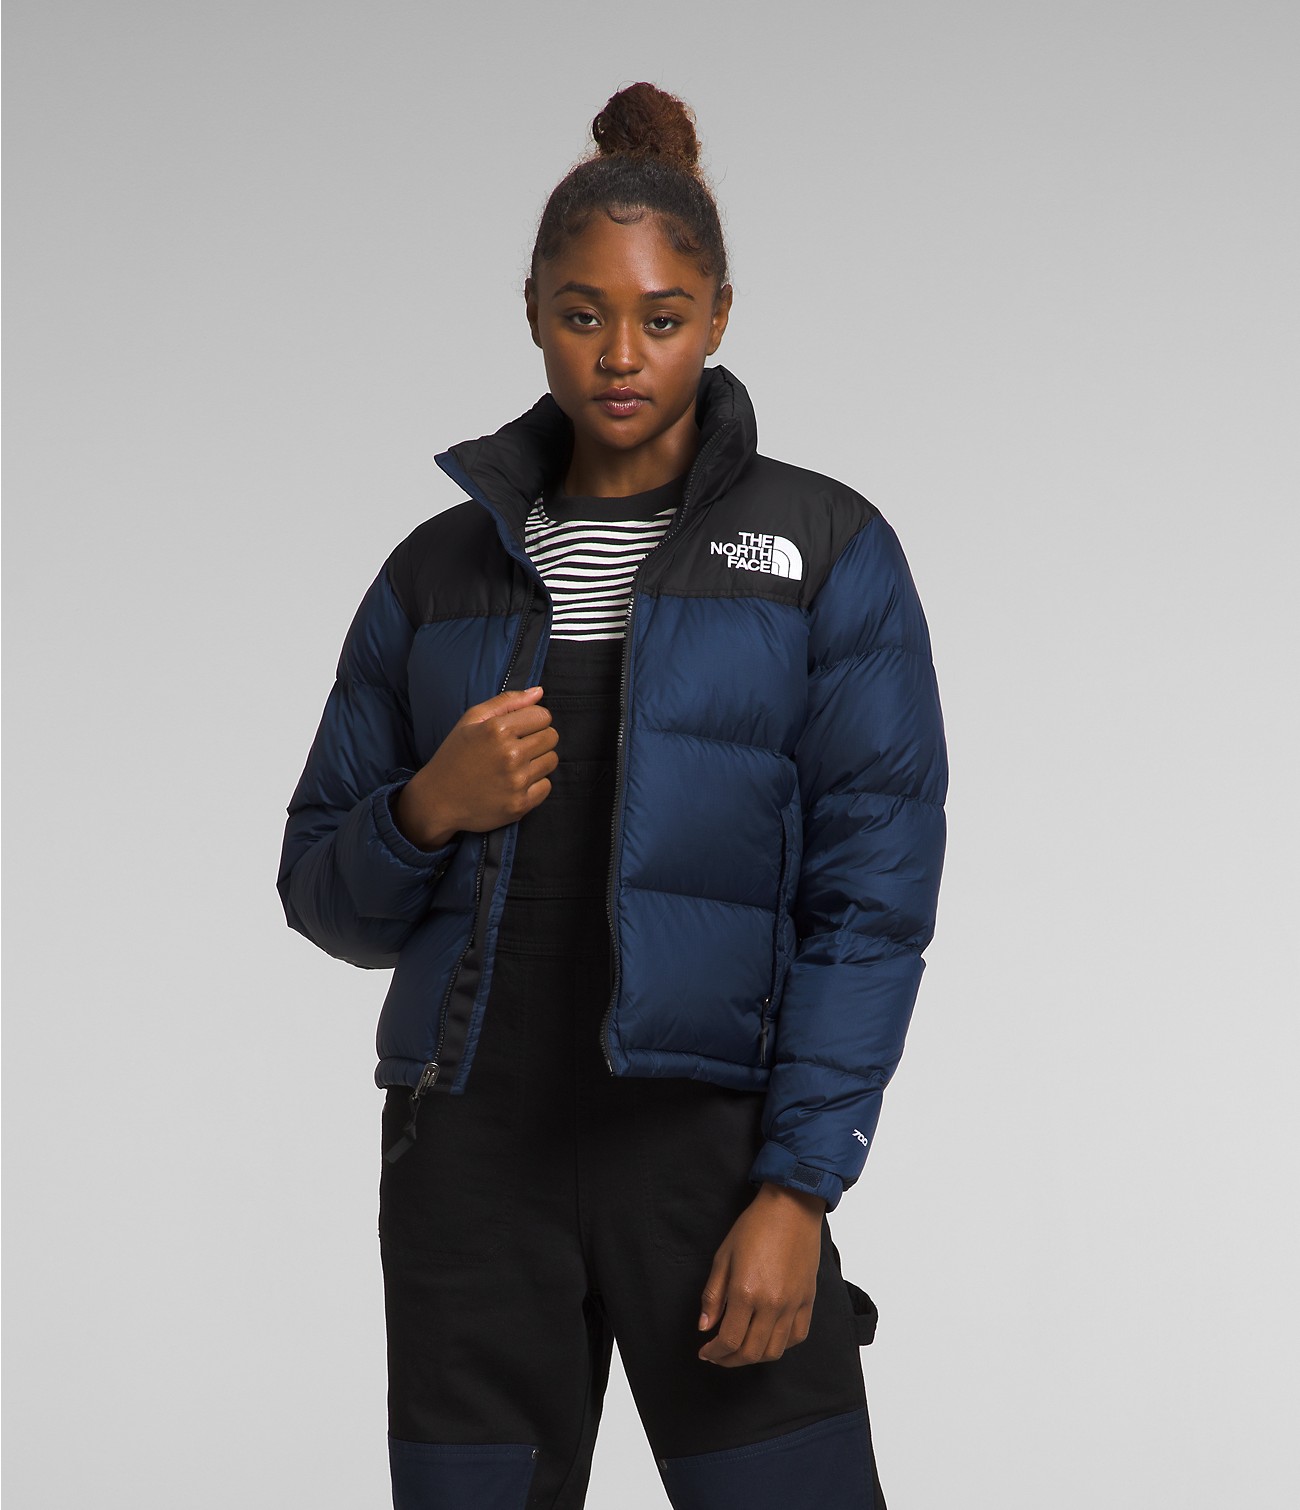 Unlock Wilderness' choice in the L.L.Bean Vs North Face comparison, the 1996 Retro Nuptse Jacket by The North Face